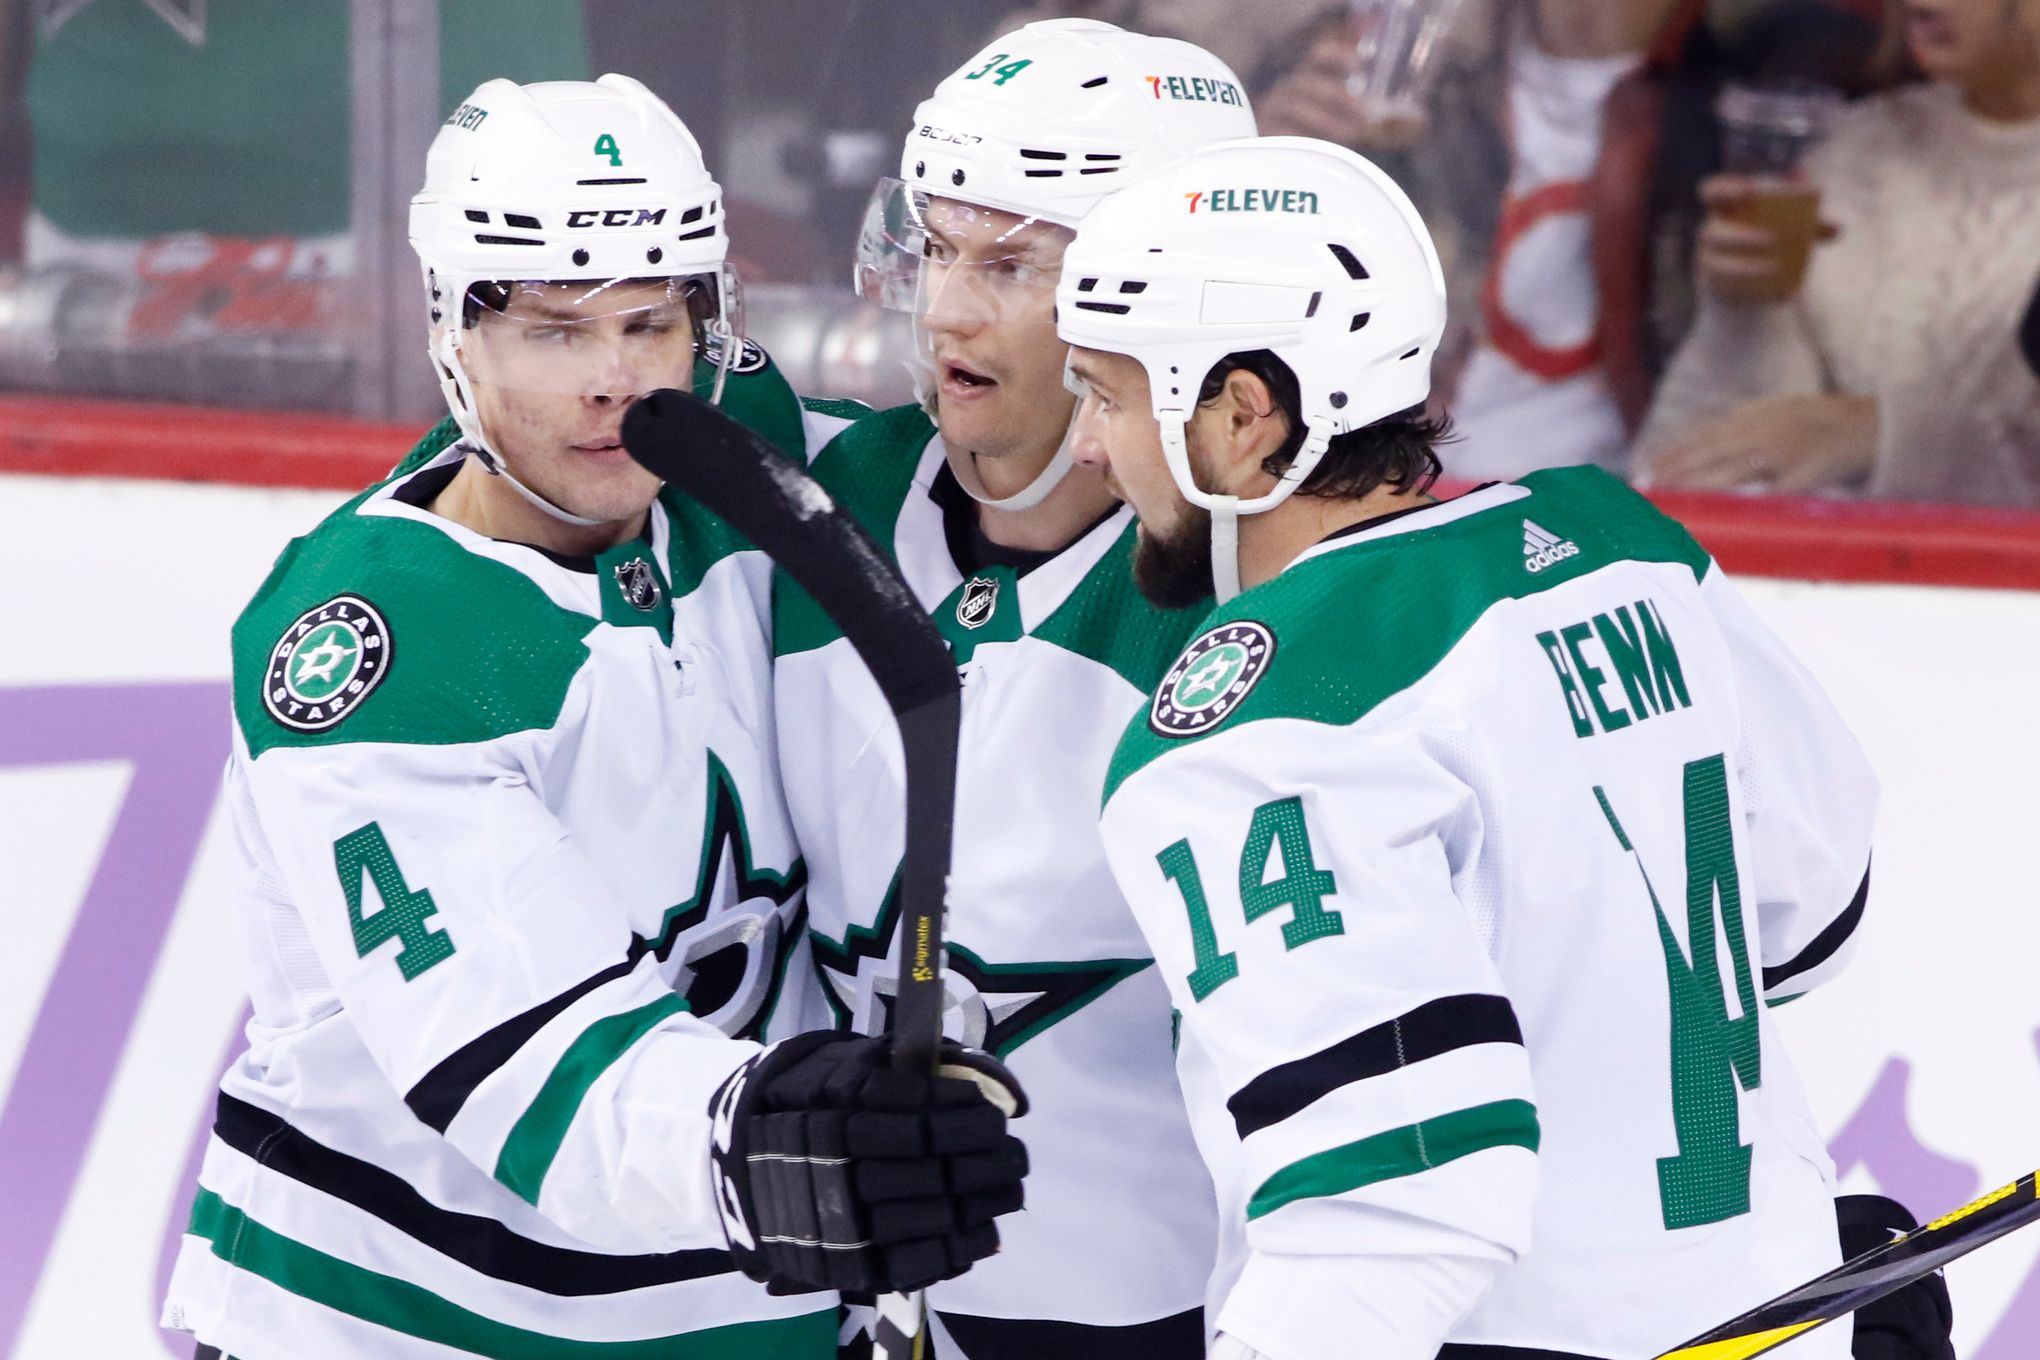 Should the Stars have benched Jamie Benn in game 6?